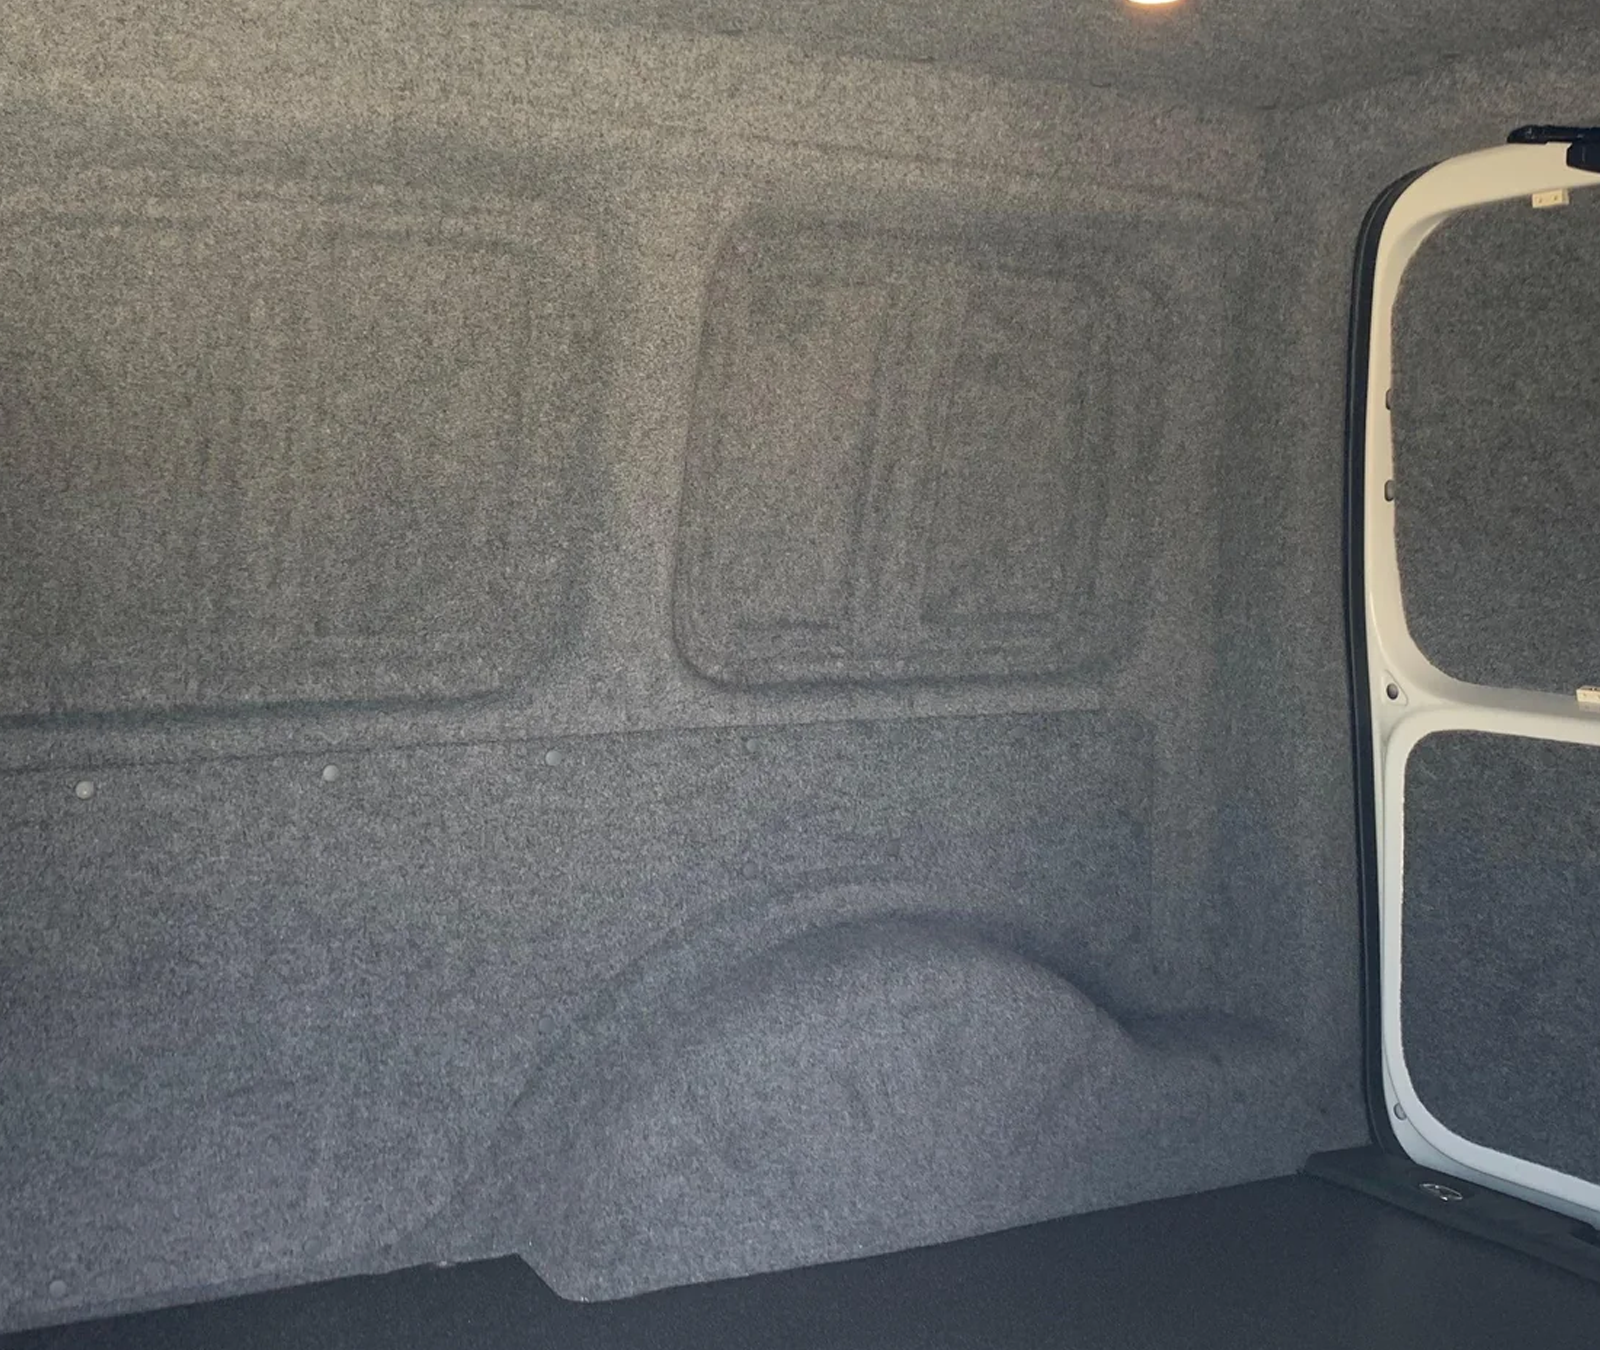 Grey carpet lining in the back of a van.